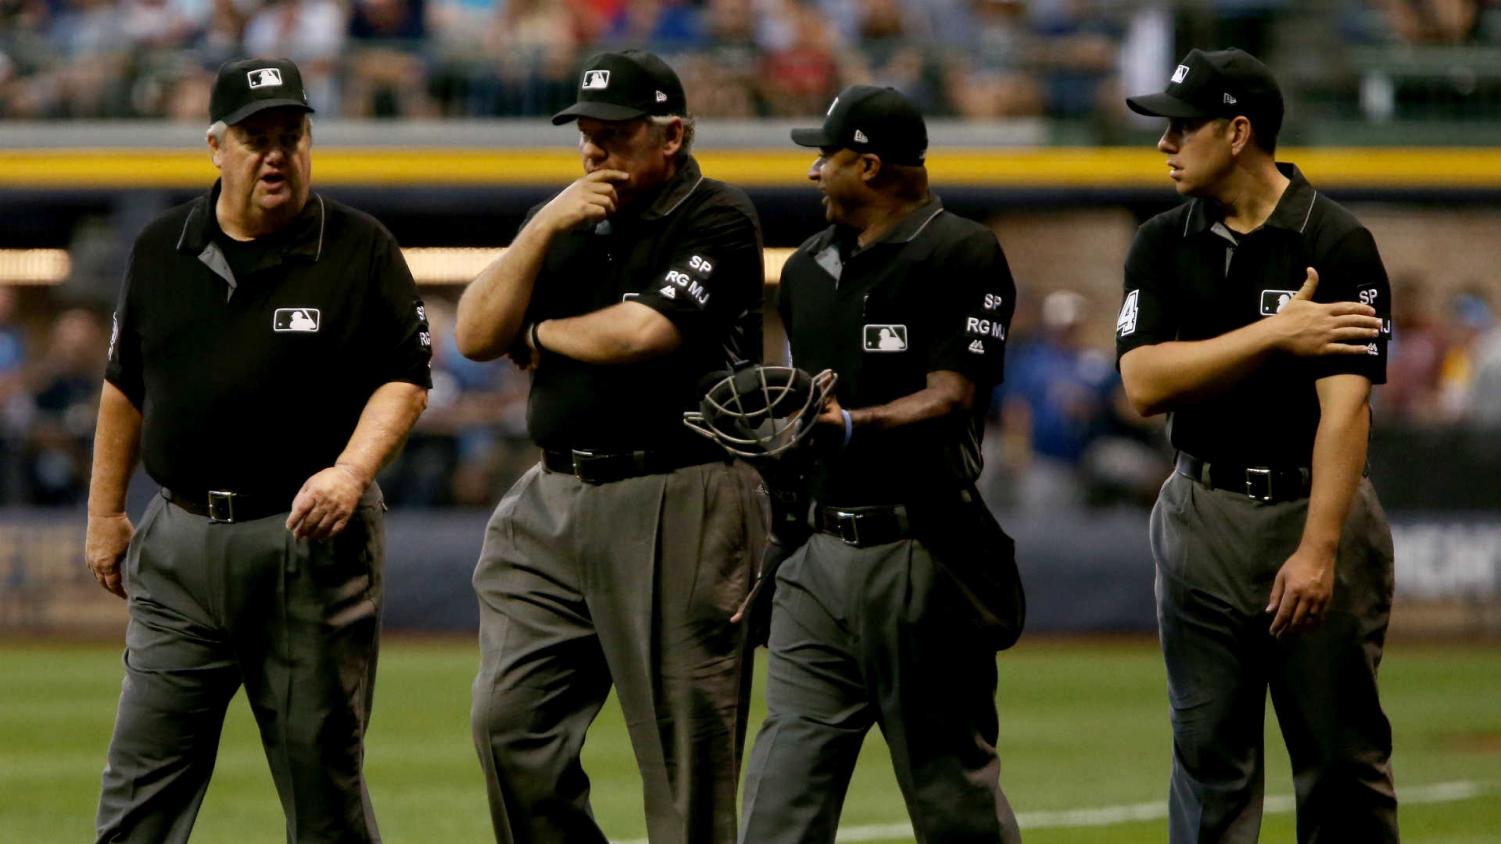 Human Fallibility and the Case for Robot Baseball Umpires